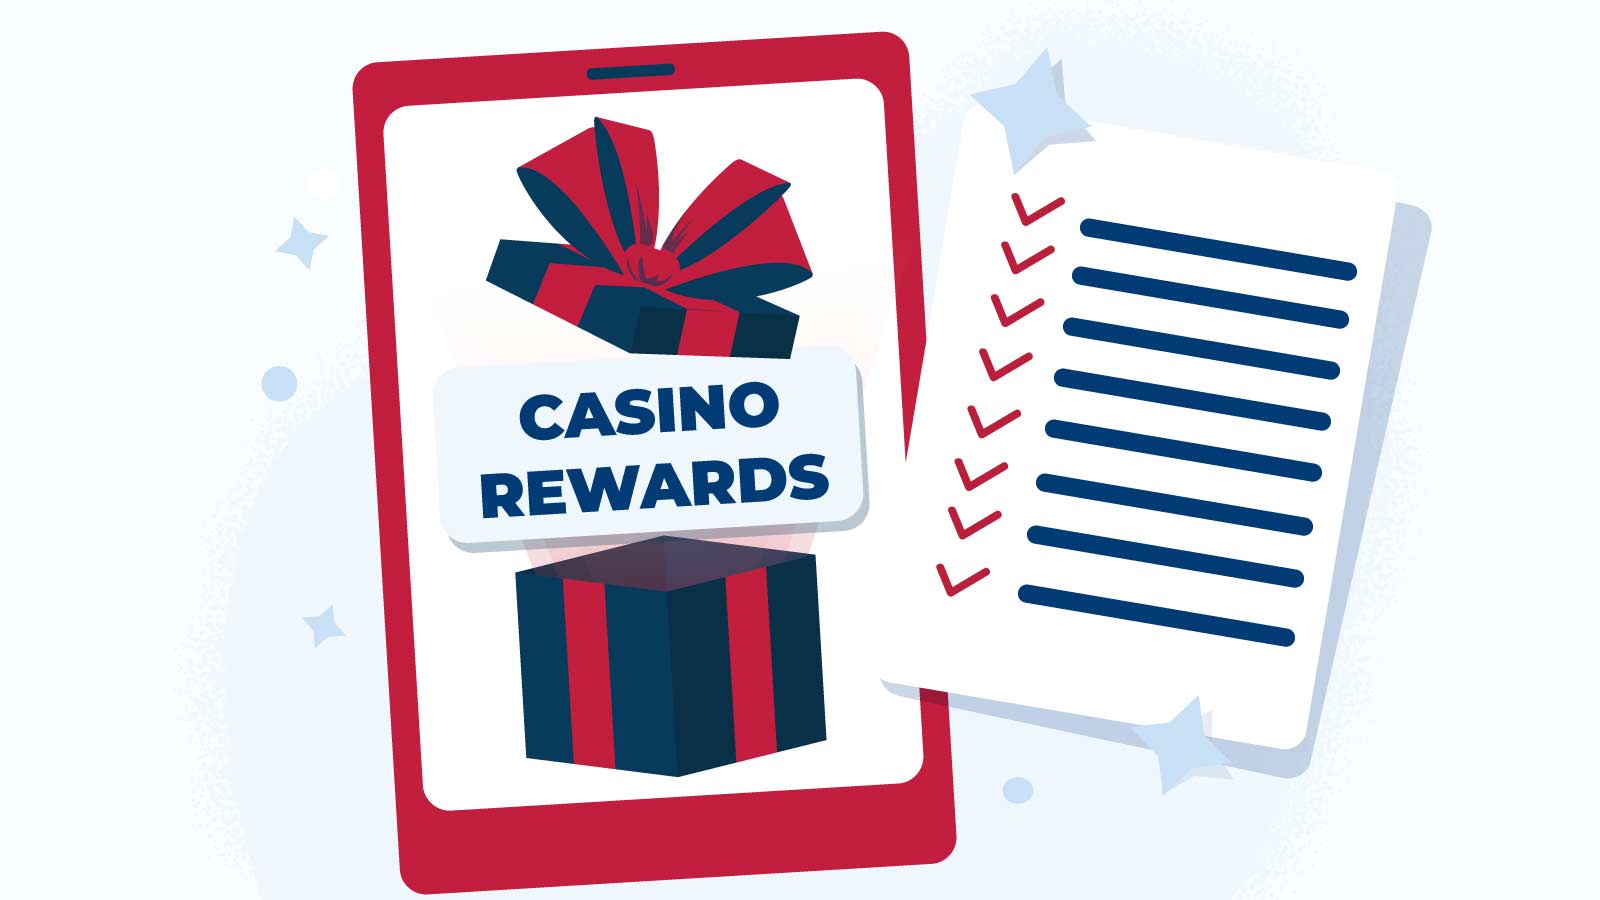 Why should you play at Casino Rewards Brazil casinos